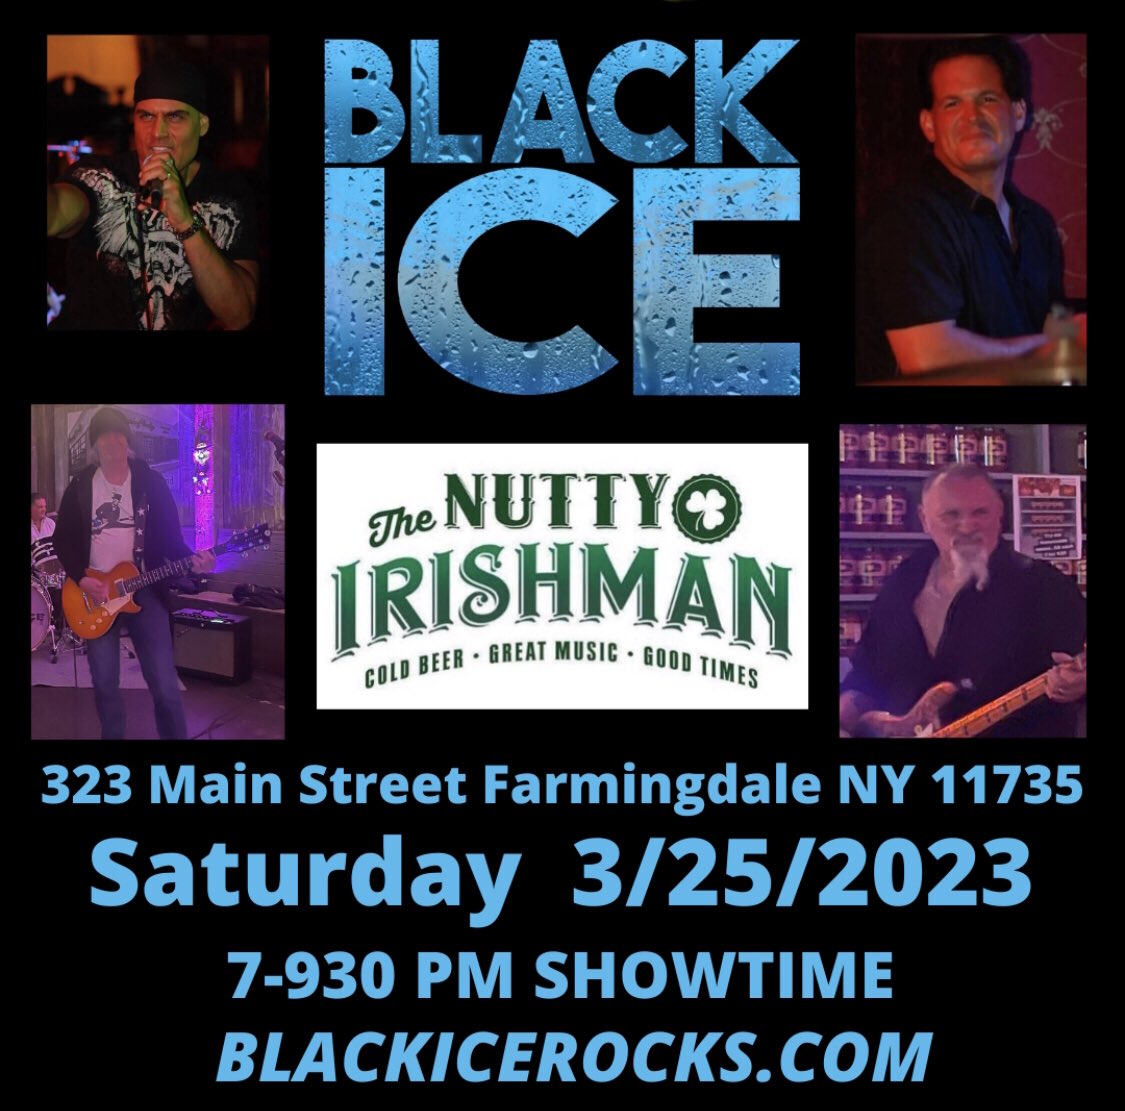 Hey Guys…This SATURDAY 3/25/23. We are back at The Nutty Irishman in FARMINGDALE. Come on down. 7PM start #blackicerocks #thenuttyirishman #farmingdaleny #livemusic #classicrockmusic